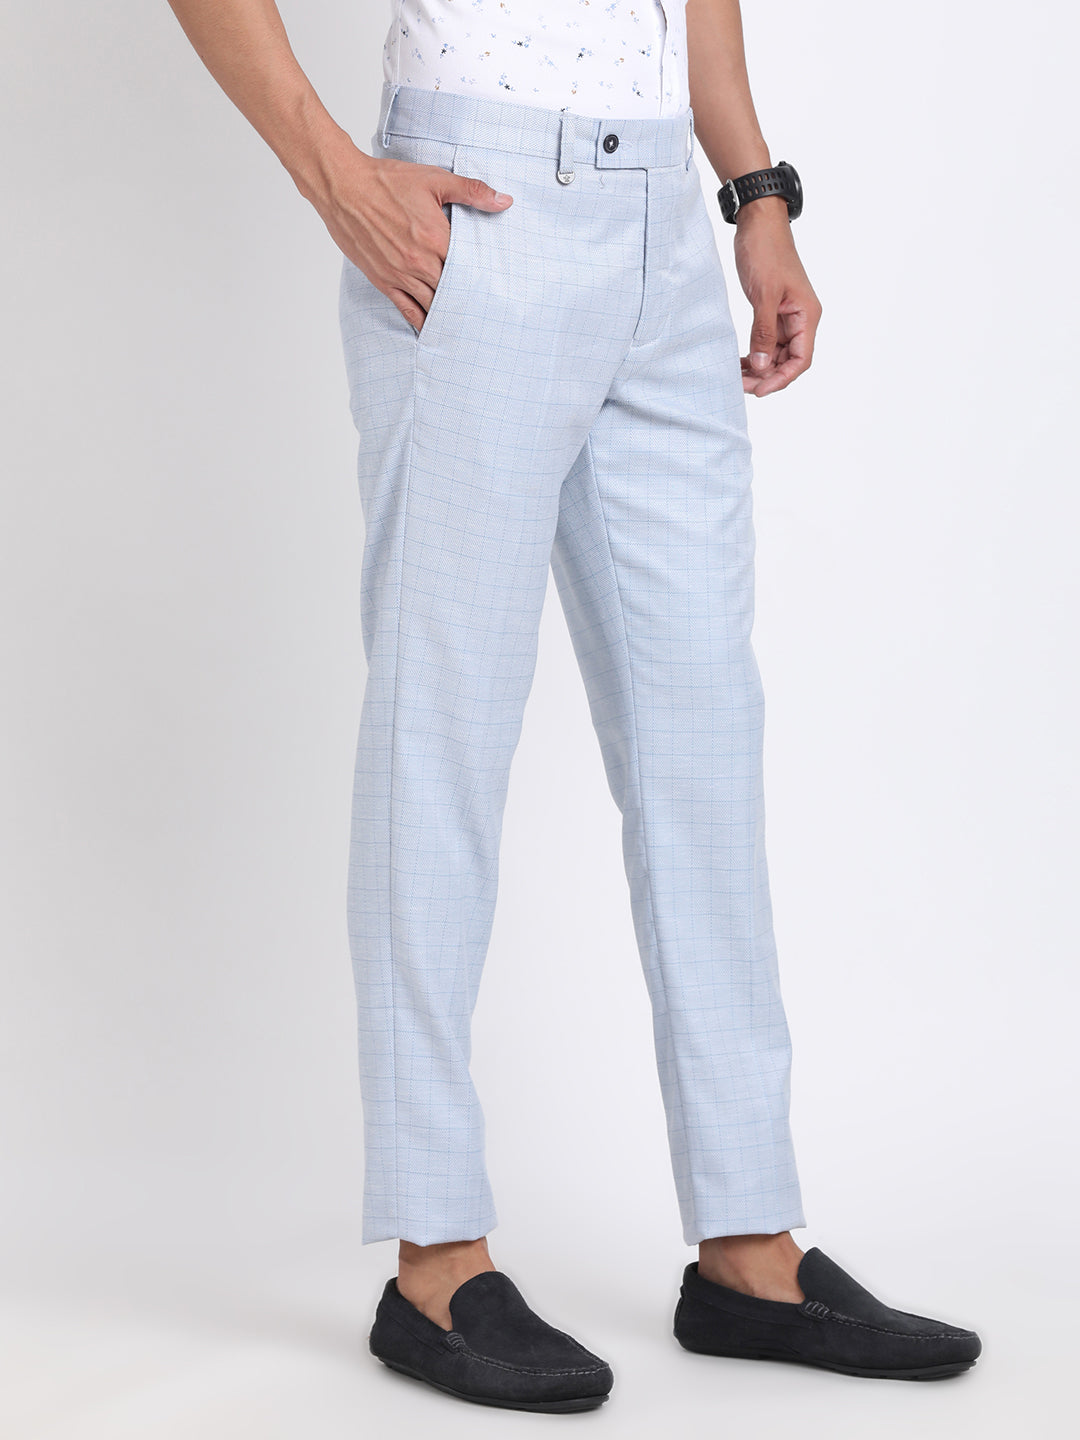 Poly Viscose Light Blue Checkered Ultra Slim Fit Flat Front Formal Trouser